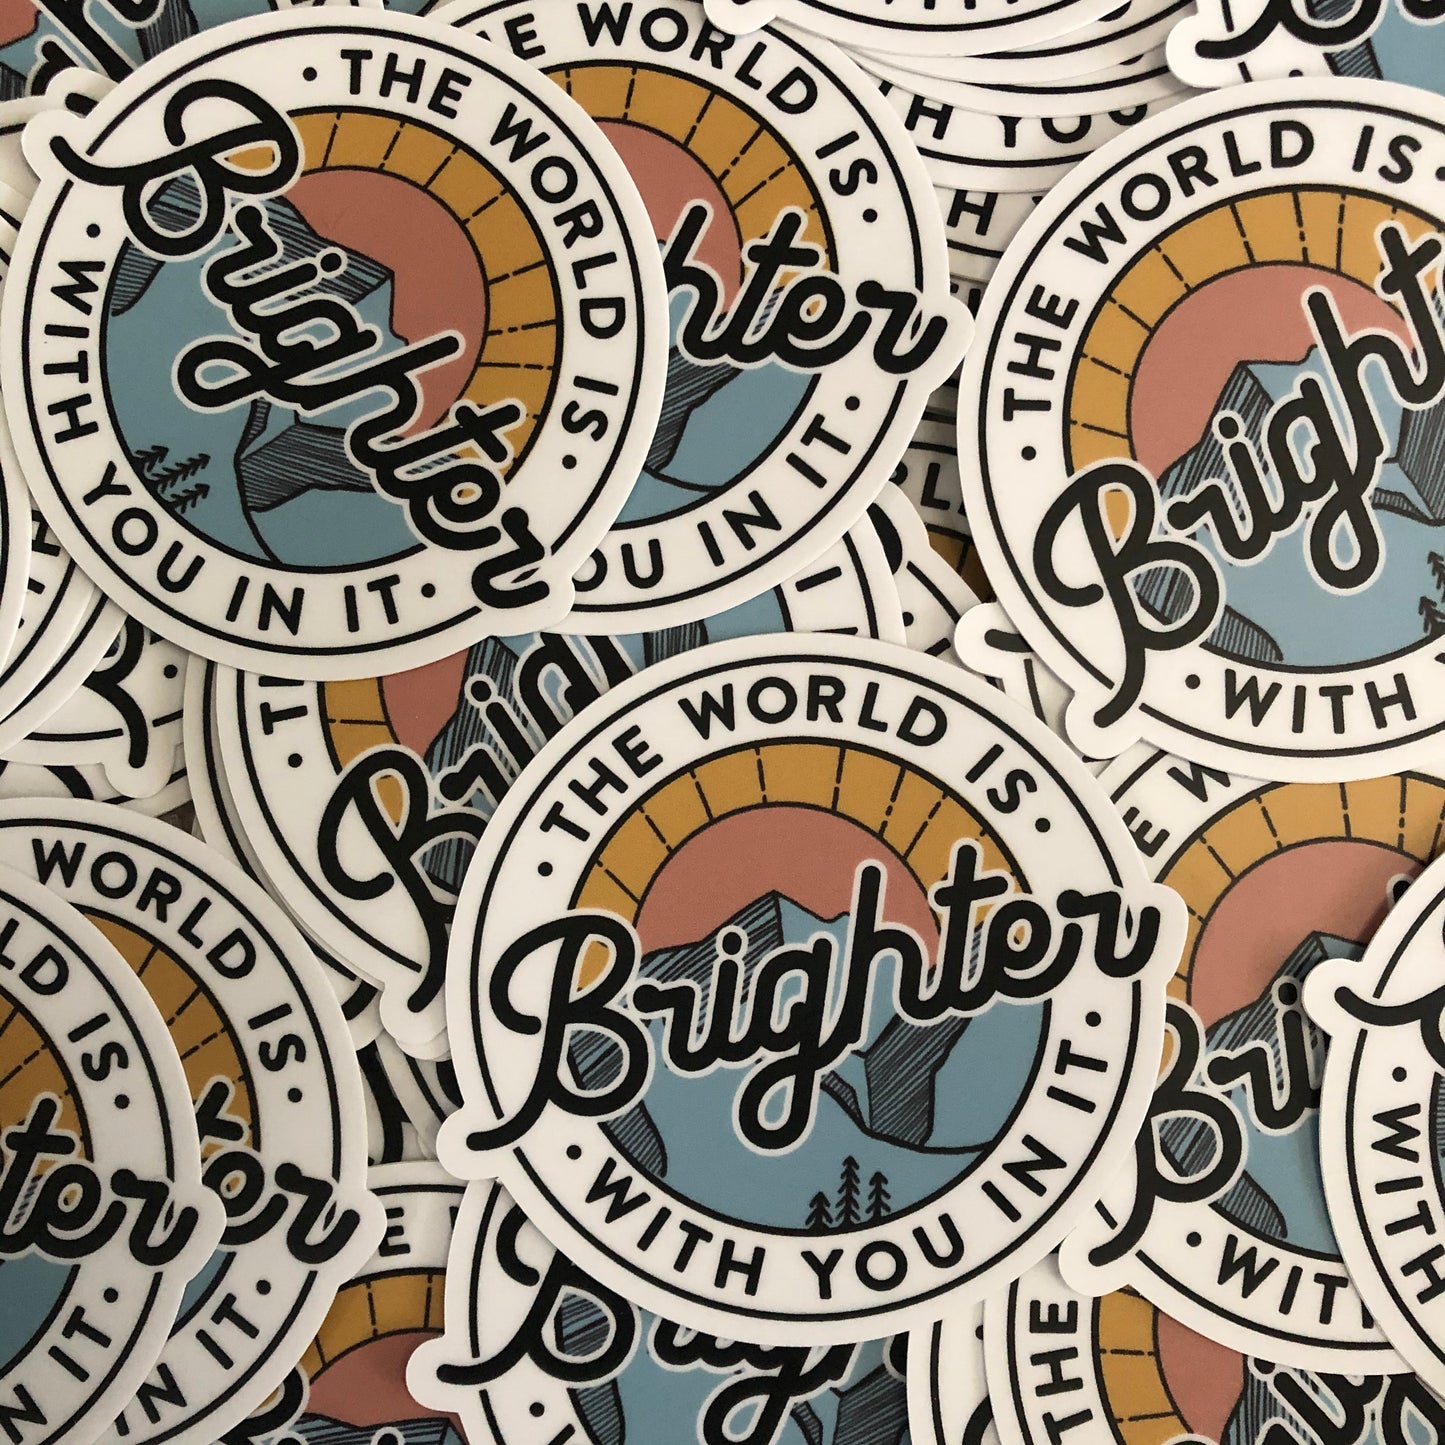 “The World Is Brighter With You In It” Waterproof Vinyl Sticker